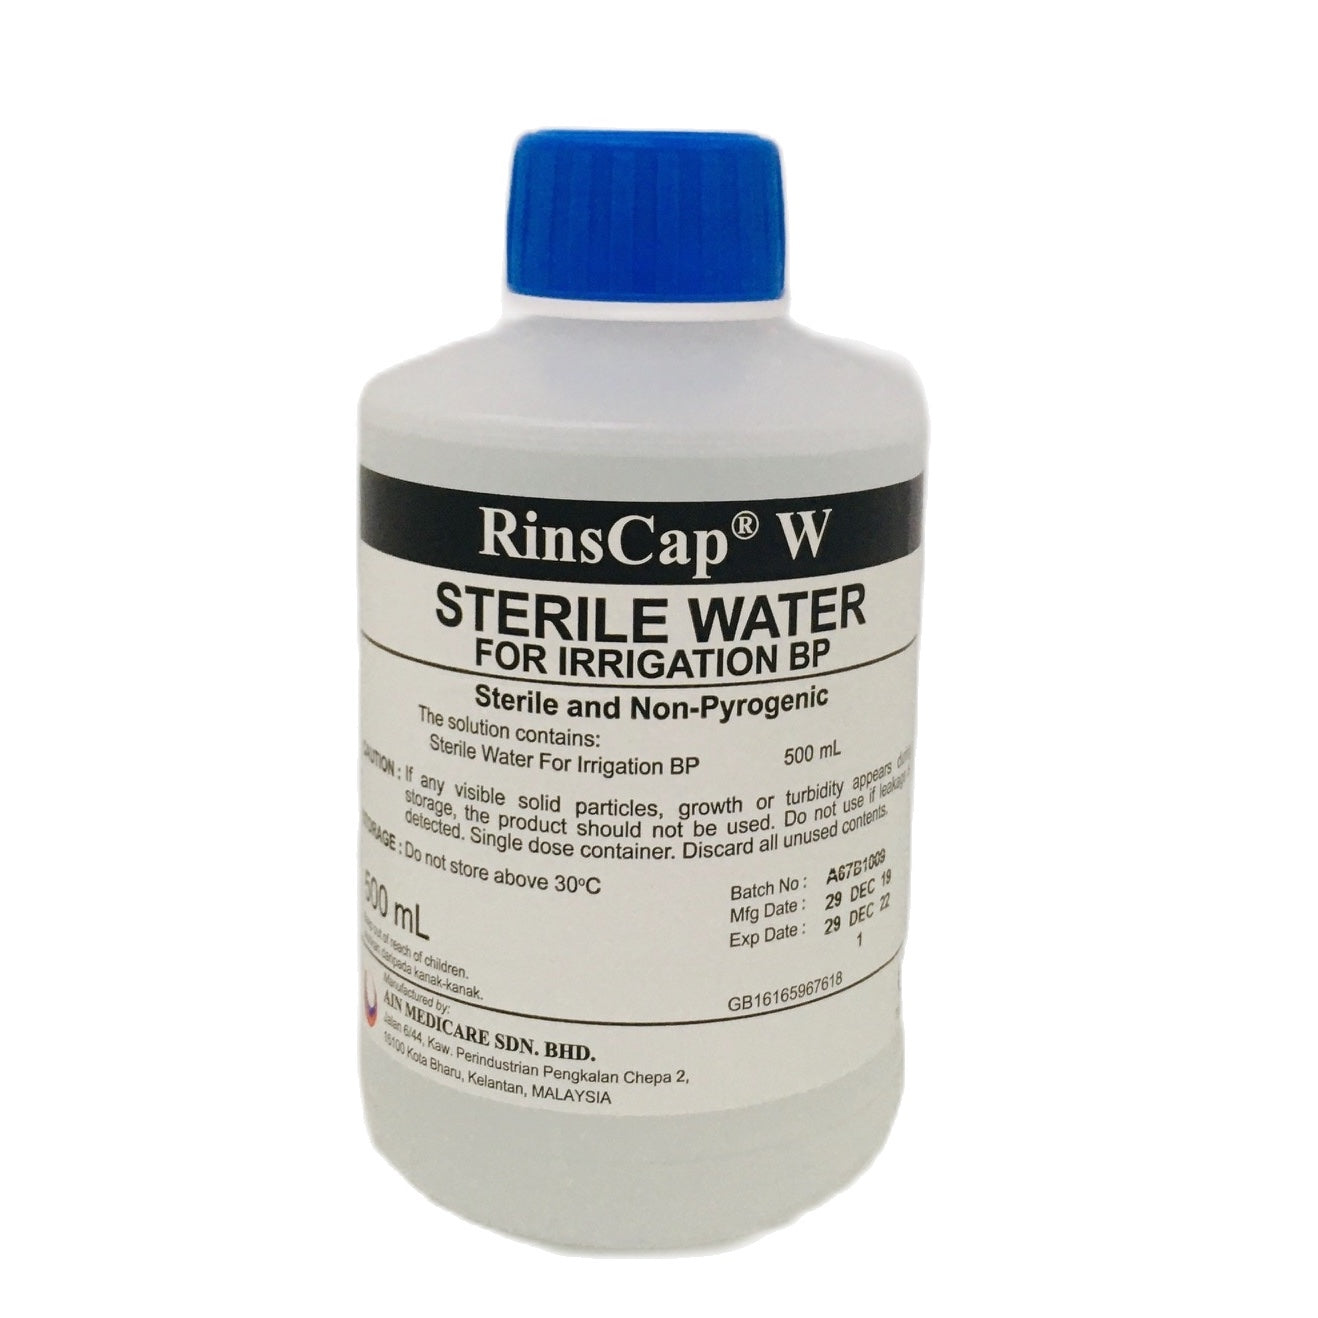 RinsCap W Sterile Water For Irrigation BP 500mL